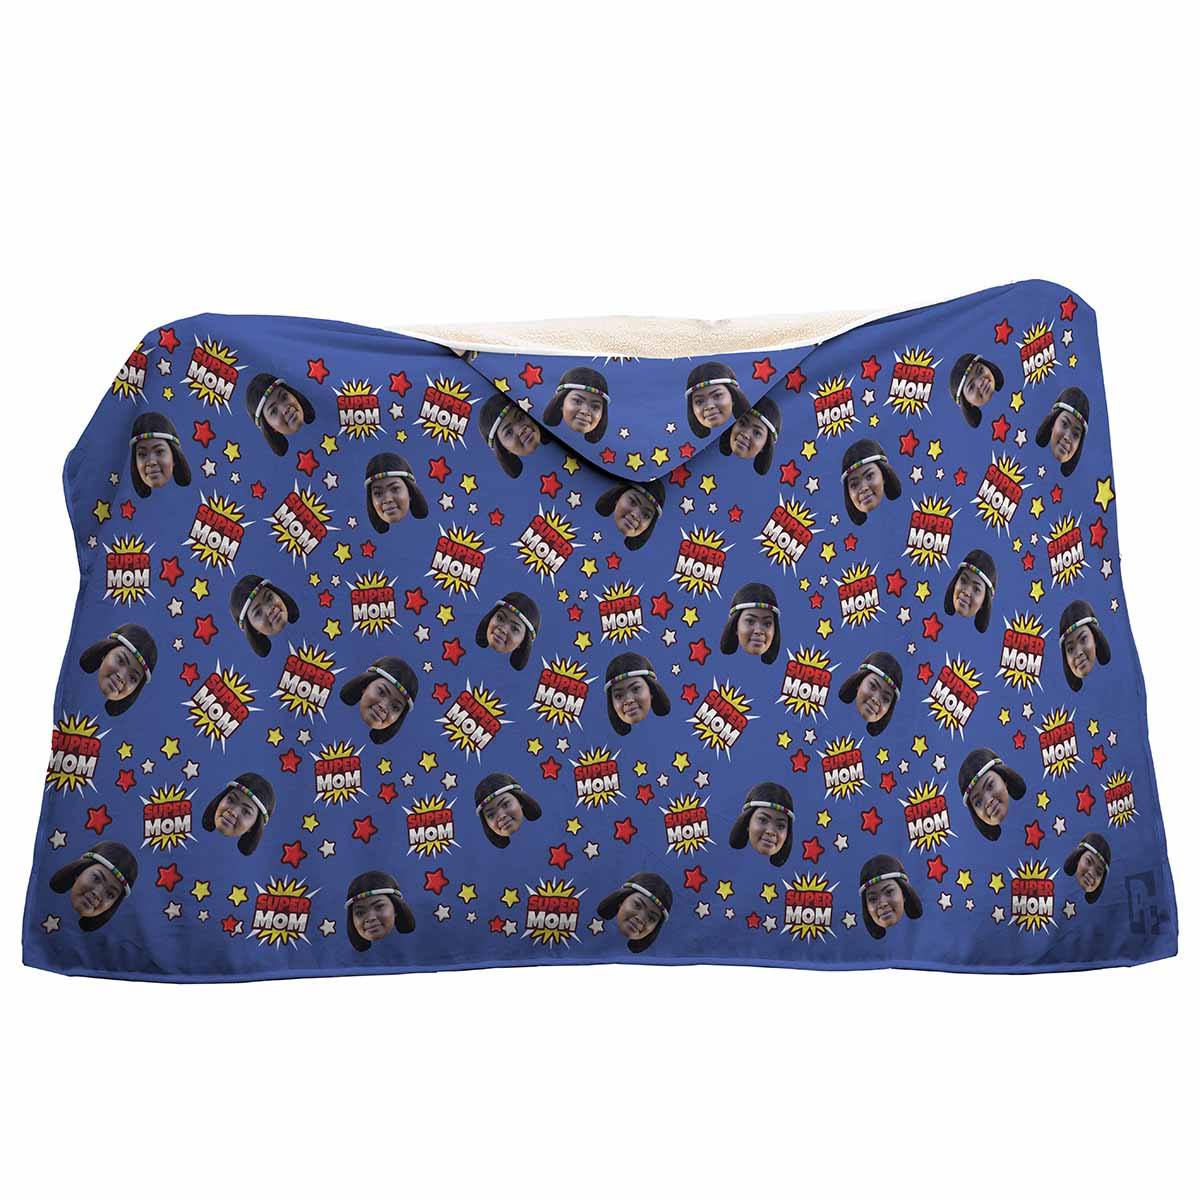 darkblue Super Mom hooded blanket personalized with photo of face printed on it